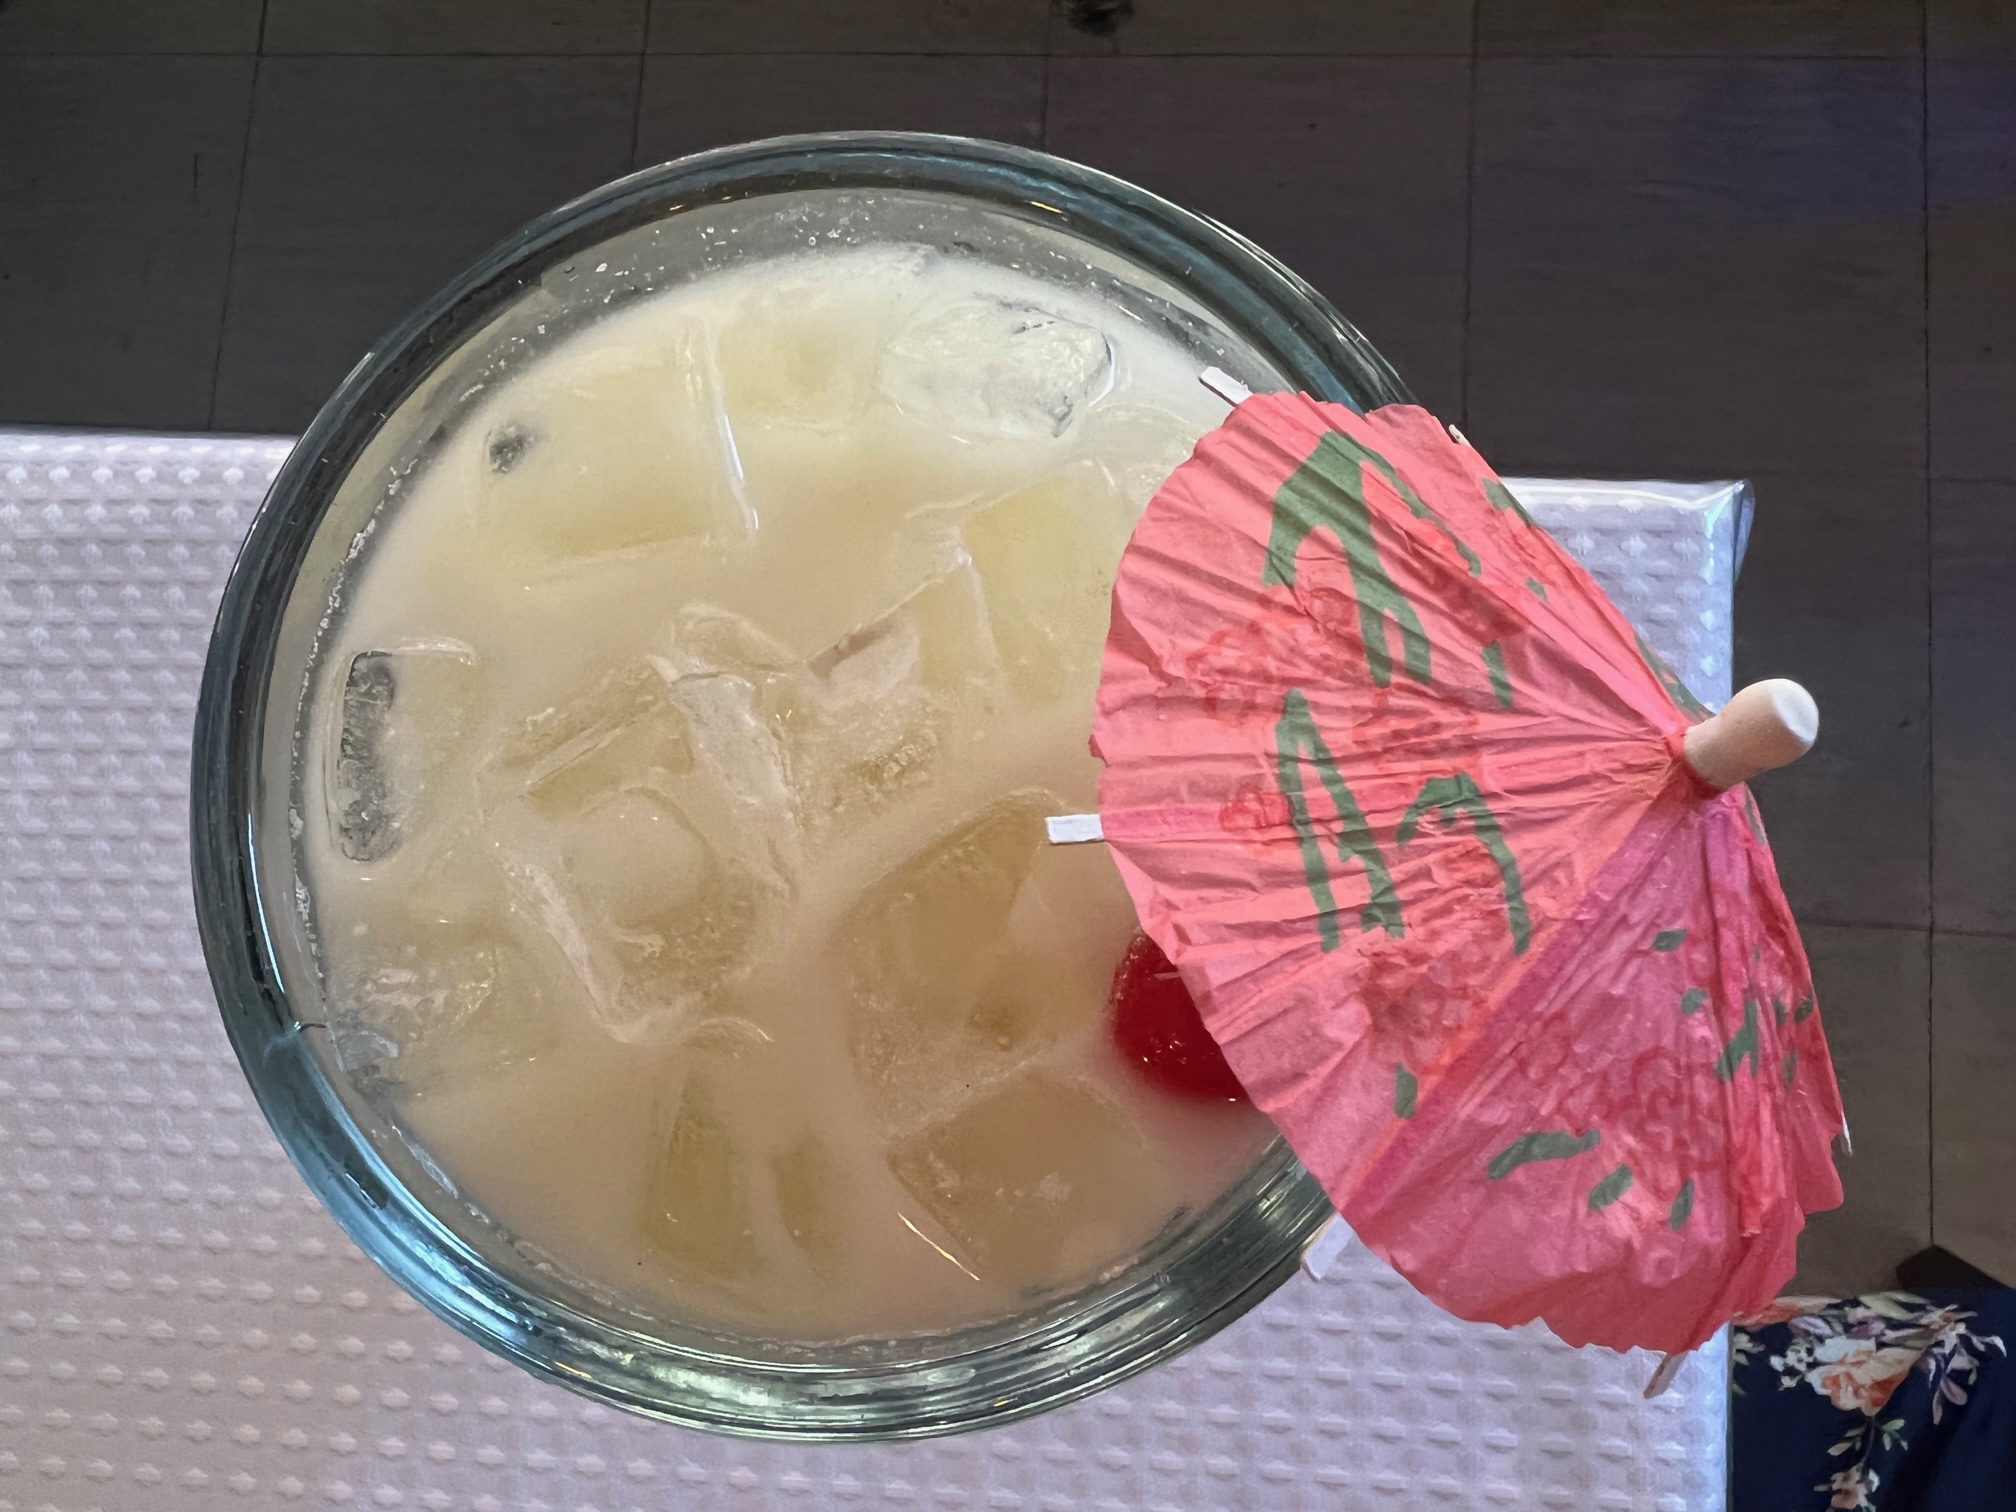 An overhead photo of a piÃ±a colada margarita at La Bahia Grill in Champaign. The white margarita is in a glass goblet with a red berry and a pink drink umbrella. Photo by Alyssa Buckley.